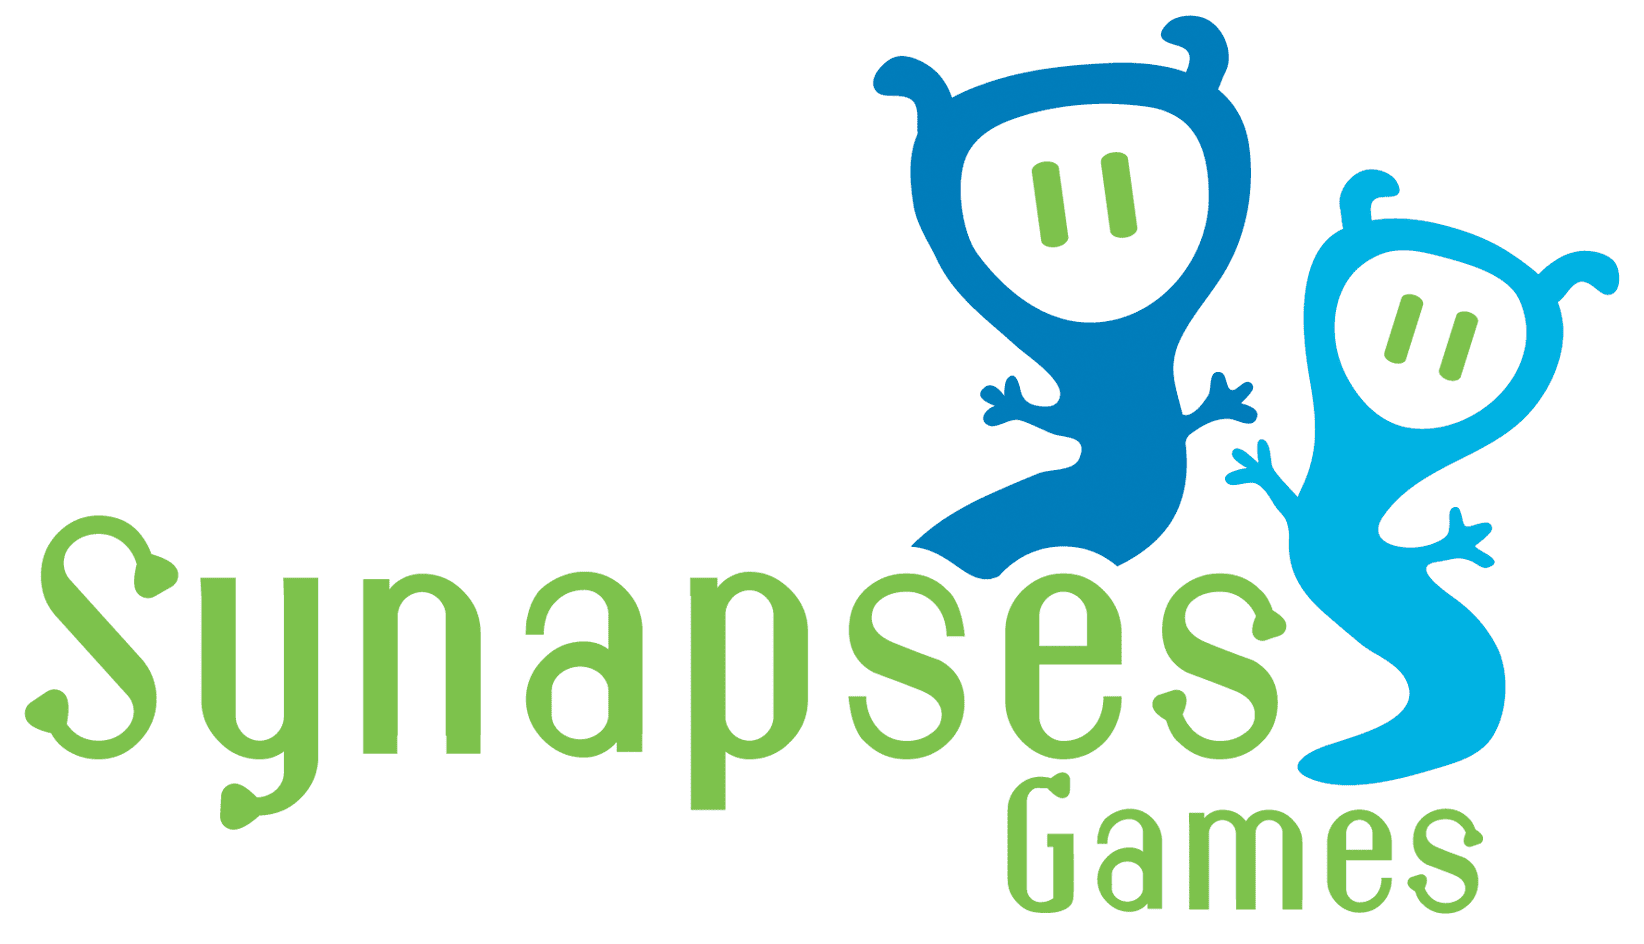 Brand: Synapses Games